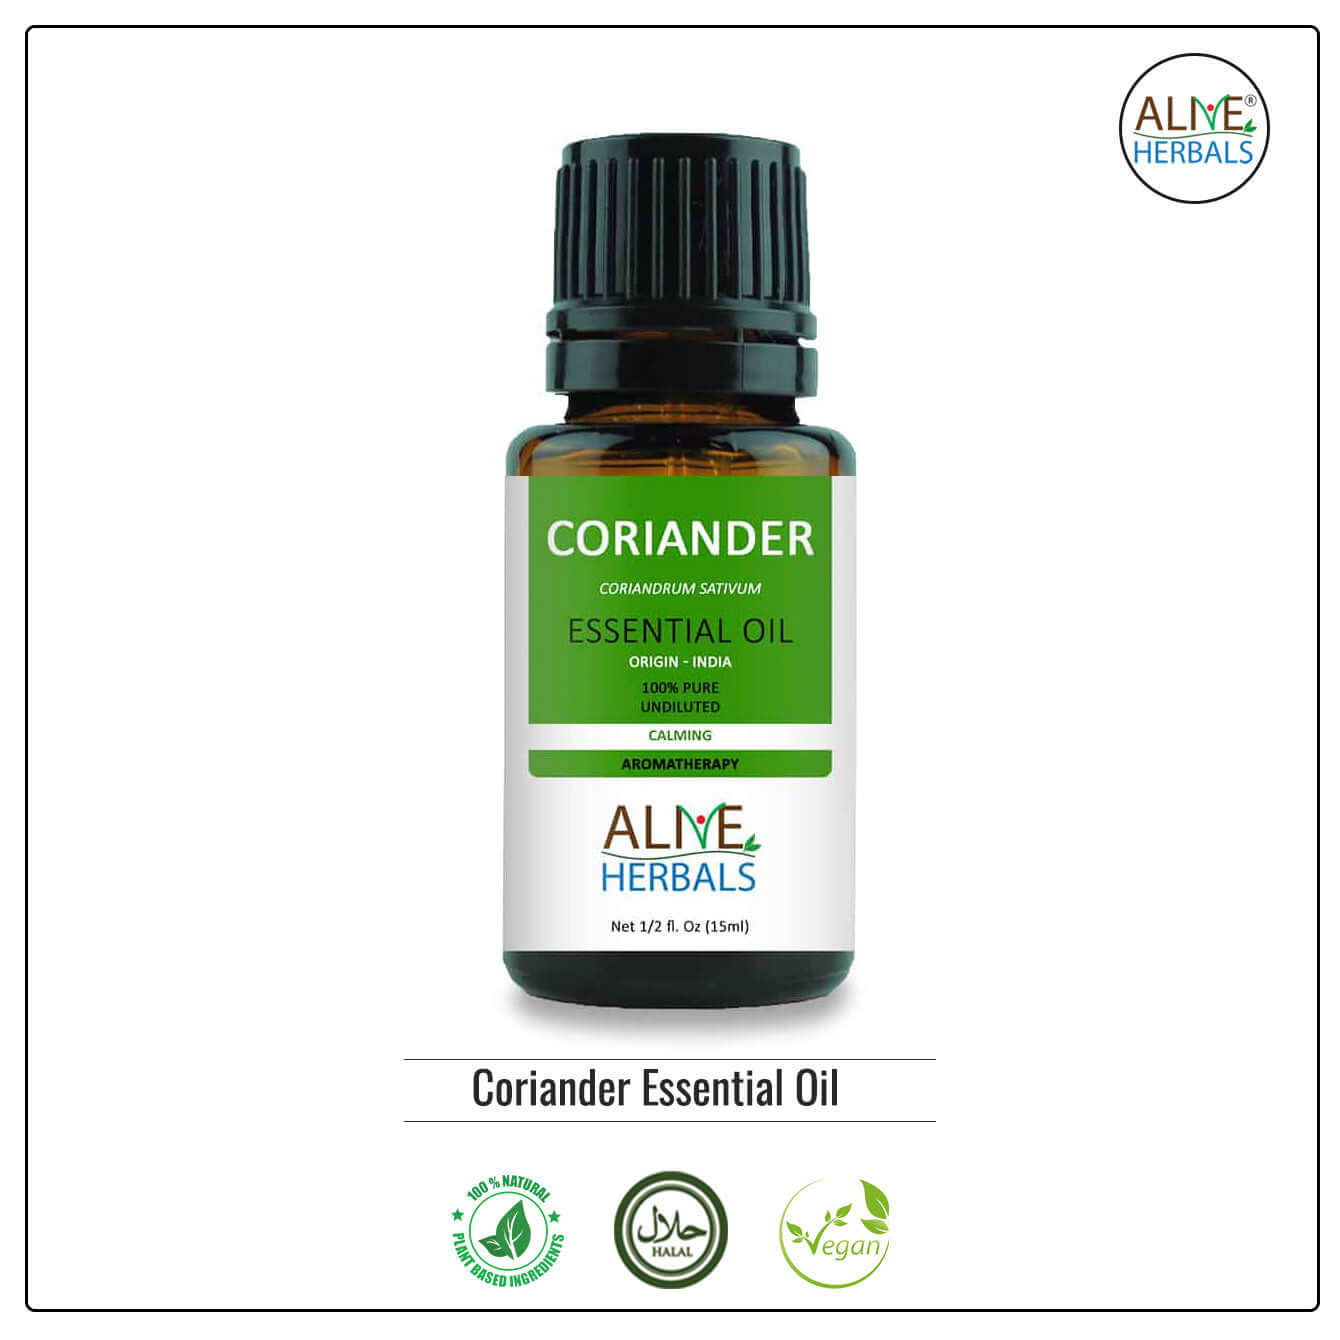 Coriander Essential Oil - Buy at Natural Food Store | Alive Herbals.